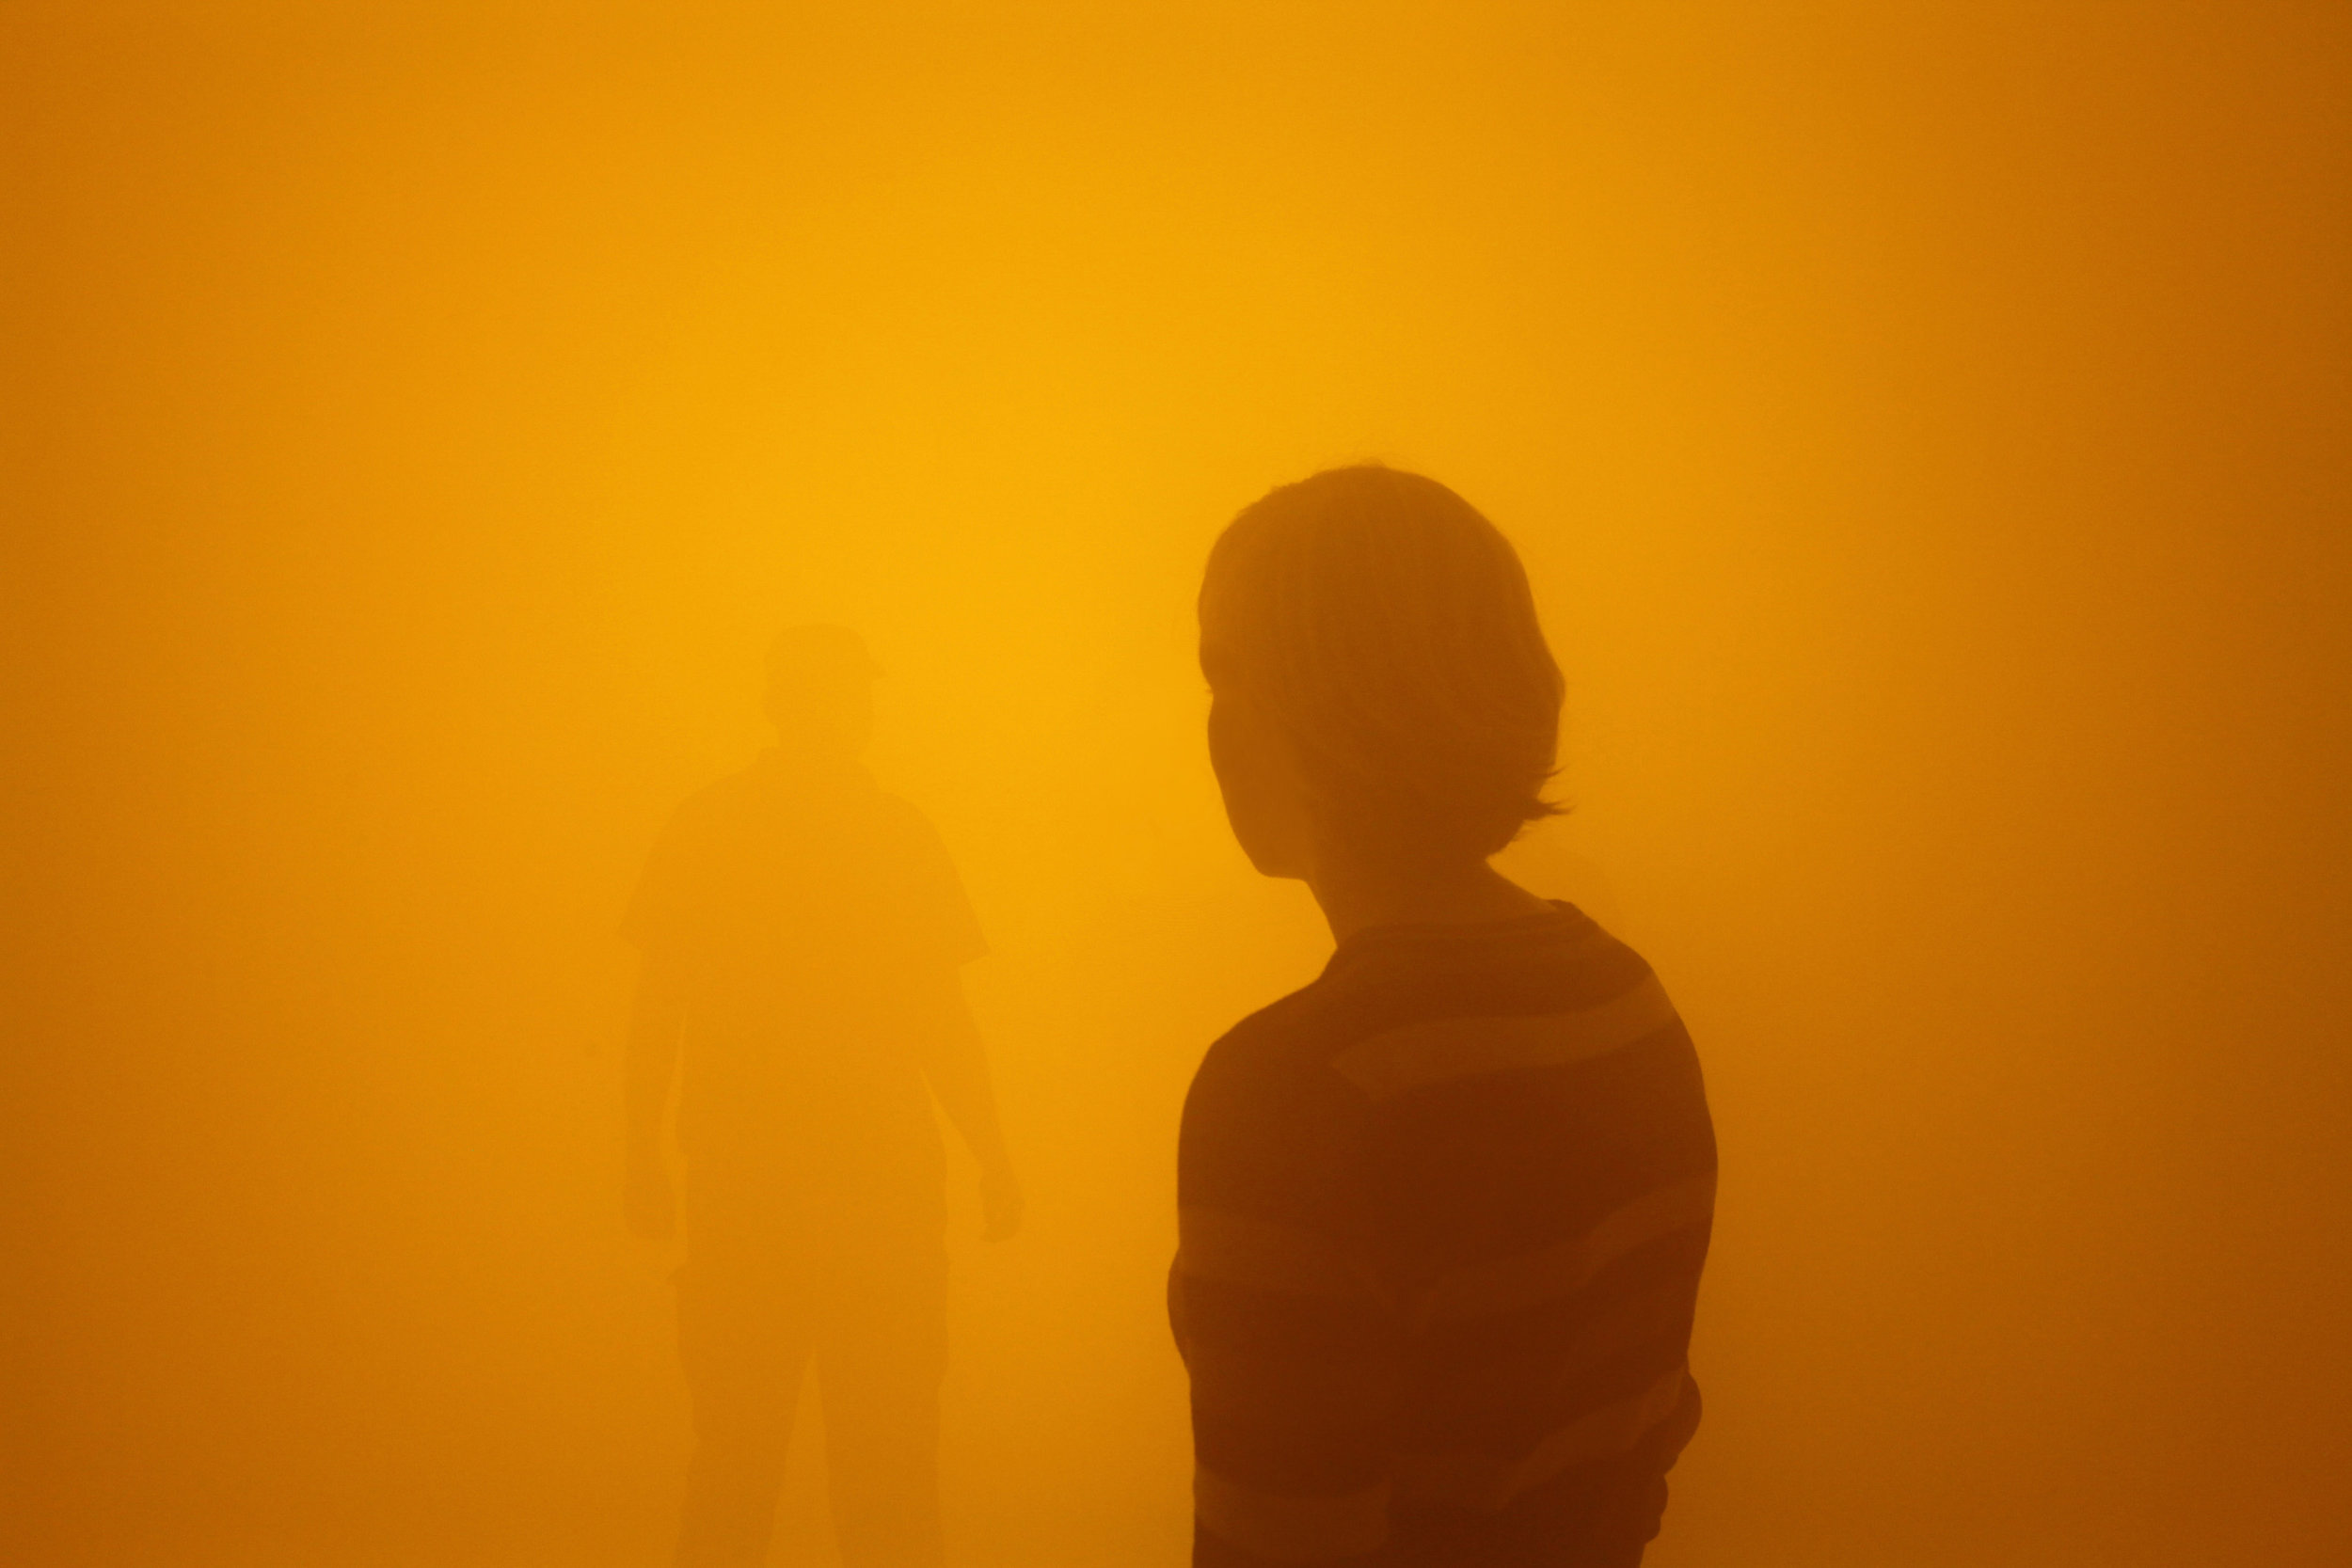   Olafur Eliasson (b.1967)   Din blinde passager  (Your blind passenger) 2010 Fluorescent lamps, monofrequency lamps, fog machine, ventilator, wood, aluminium, steel, fabric, plastic sheet Dimensions variable Installation view at ARKEN Museum of Mode